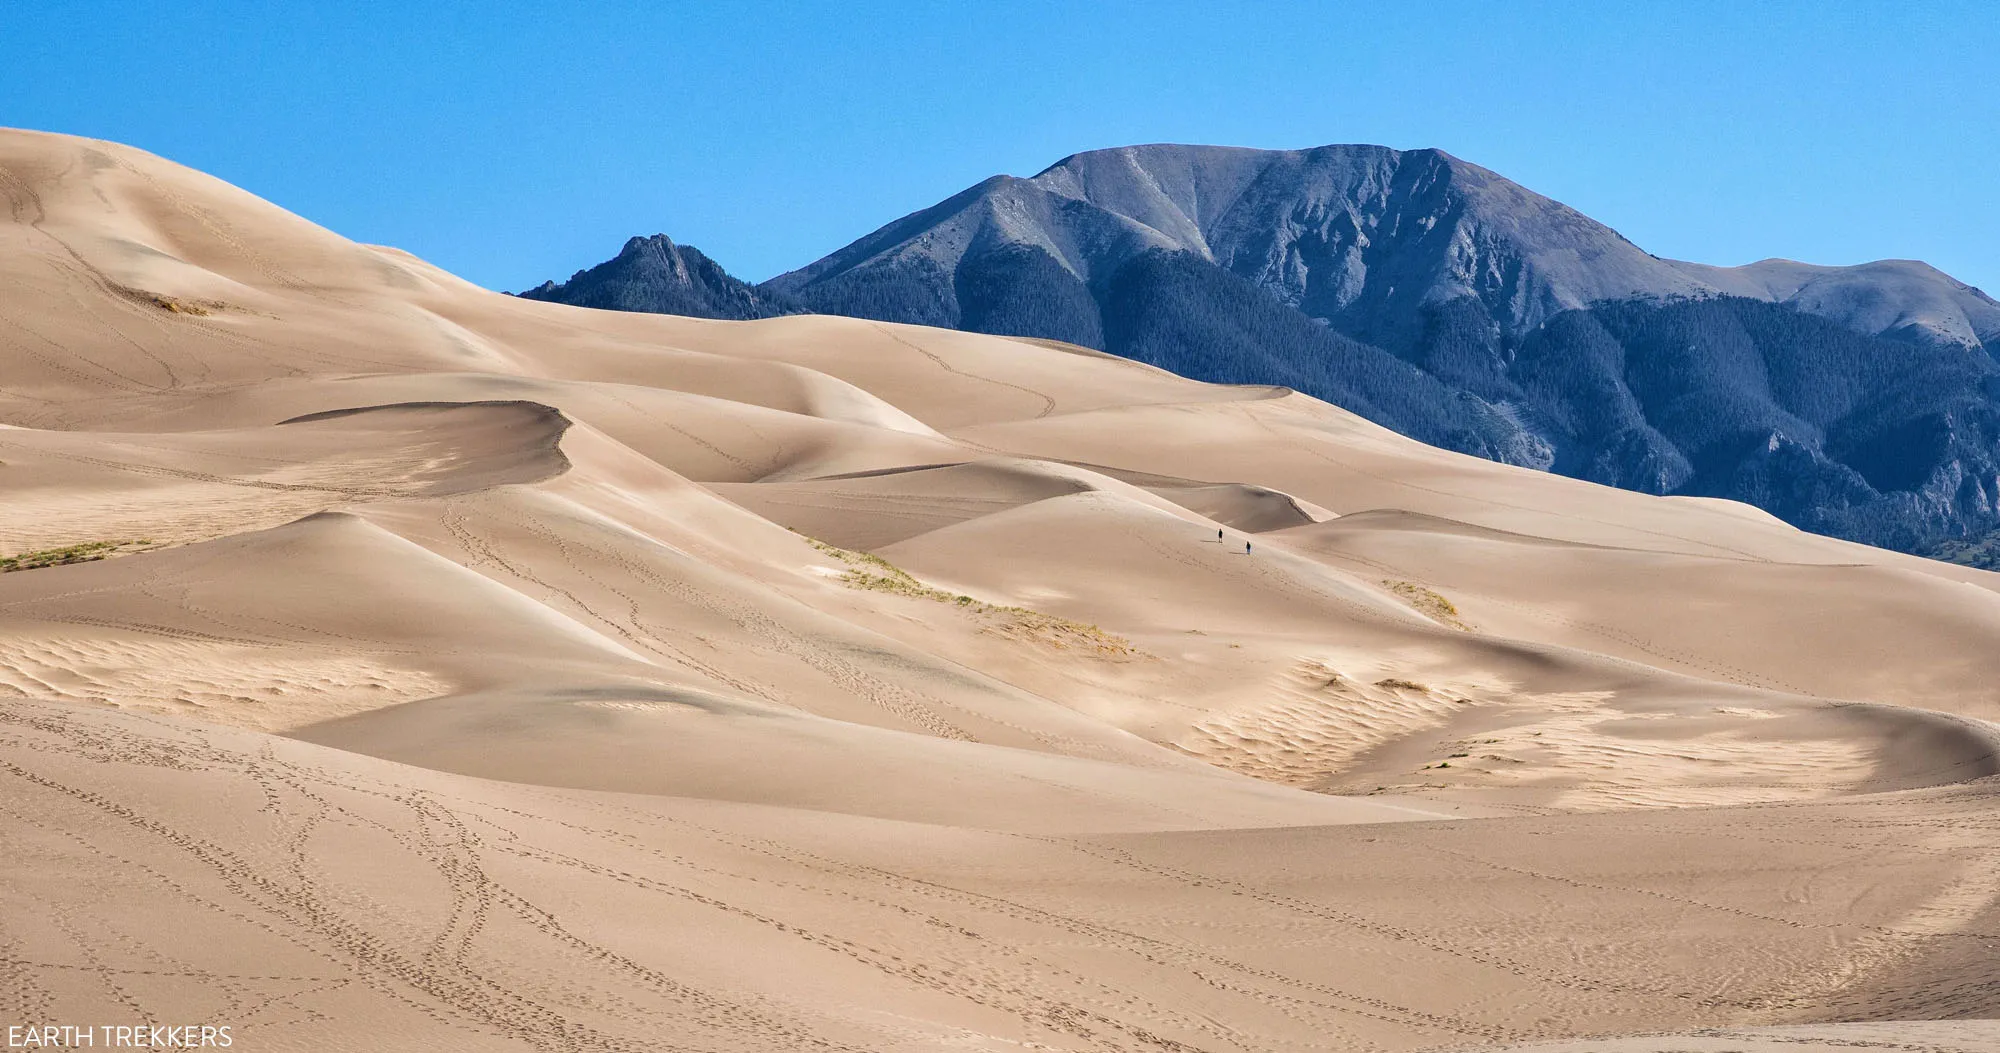 8 Amazing Things to Do at Great Sand Dunes National Park – Earth Trekkers